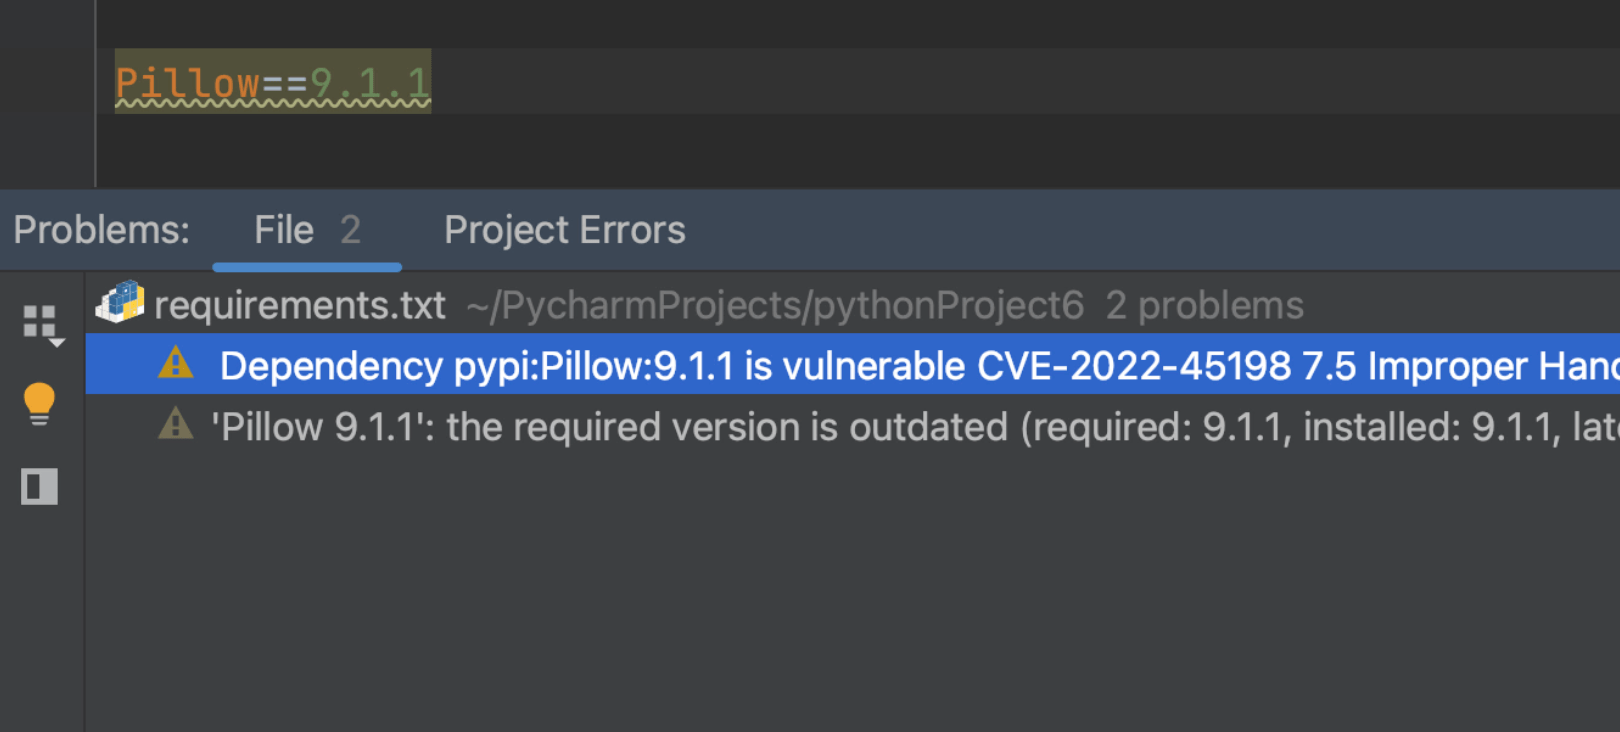 https://www.jetbrains.com/pycharm/whatsnew/img/2022.3/15_Integrated_Dev_Tools_Security_Vulnerability_checker.png